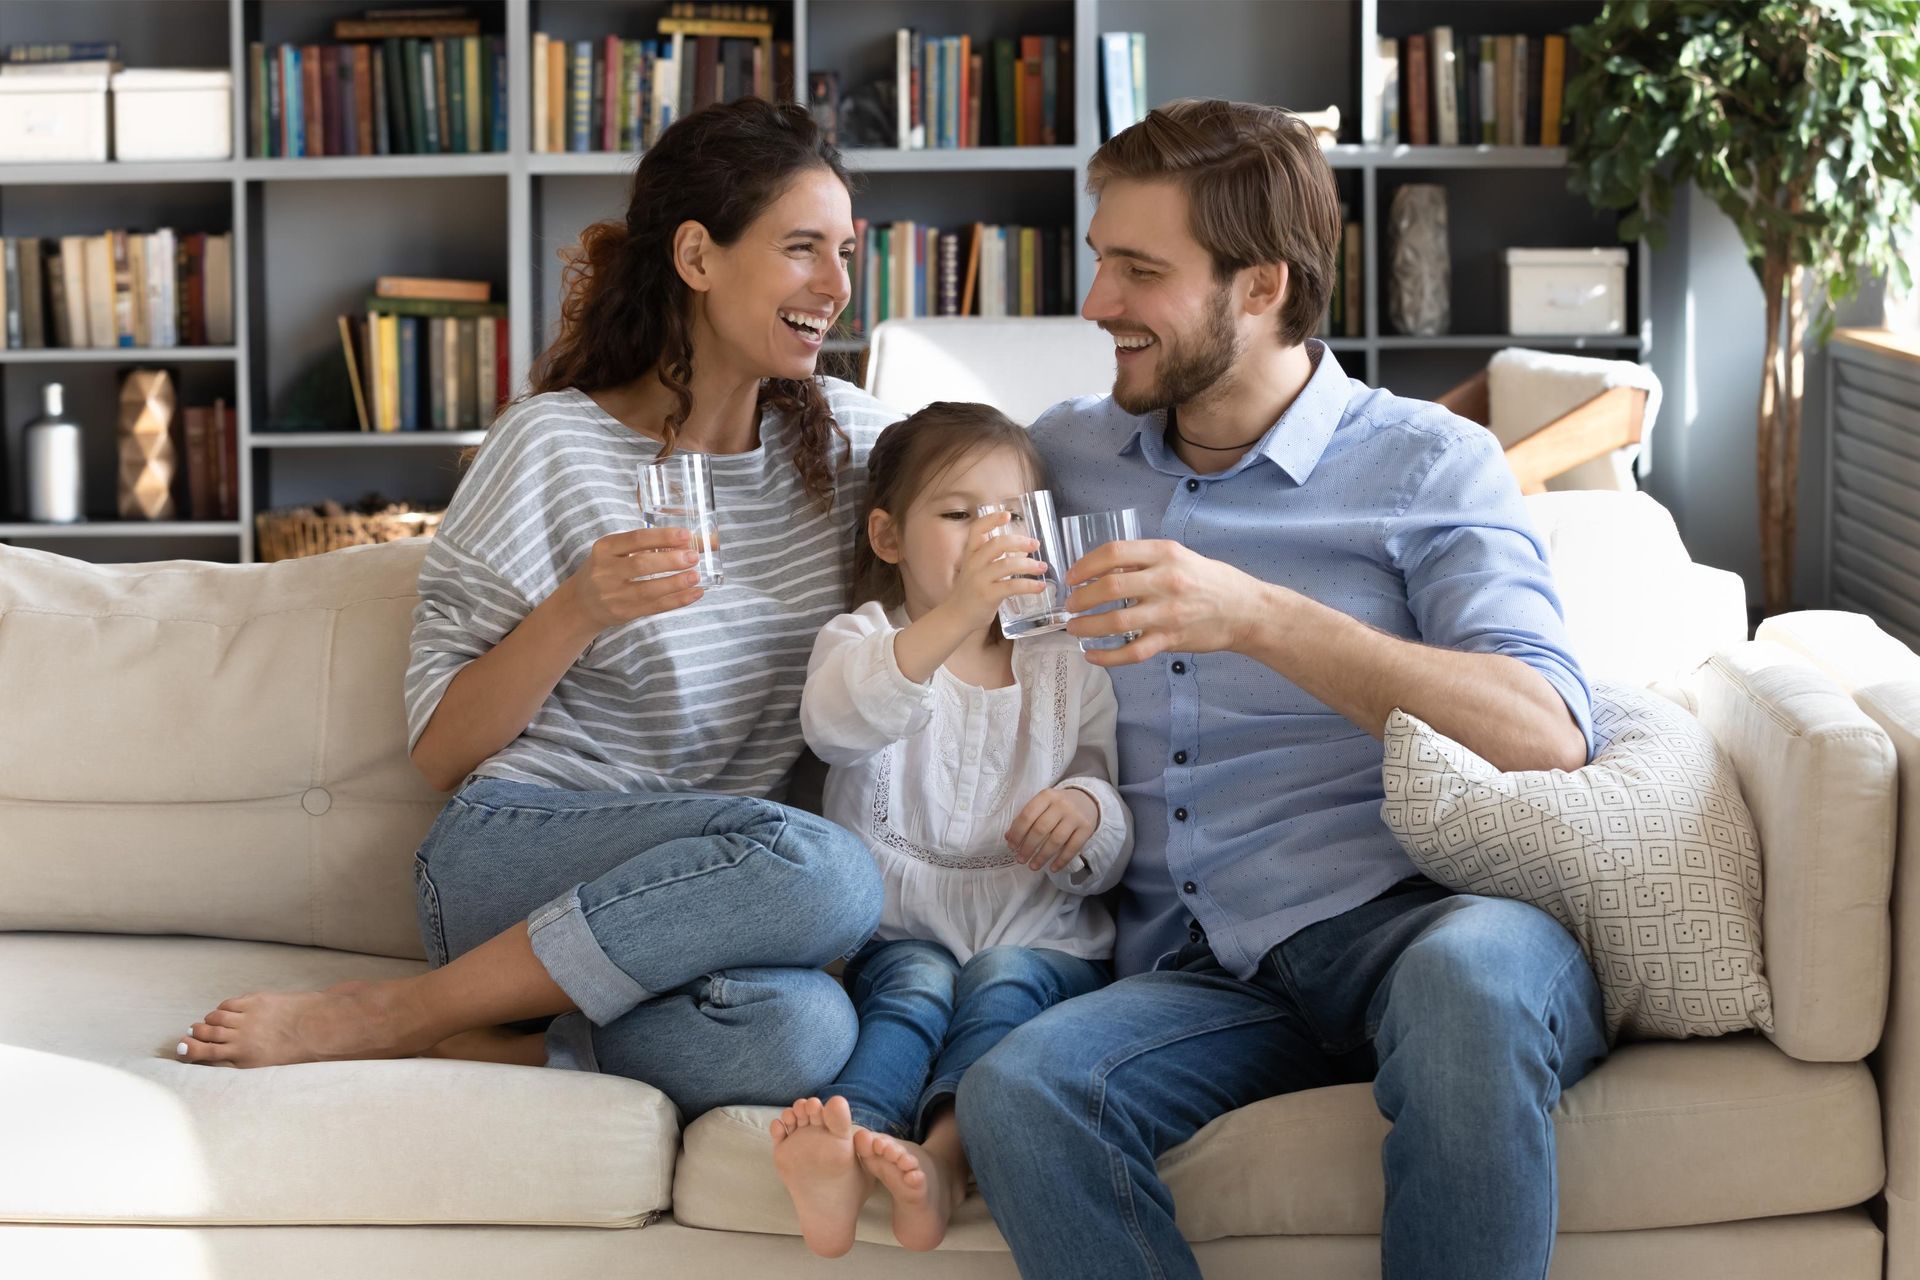 A family is sitting on a couch drinking water from glasses.